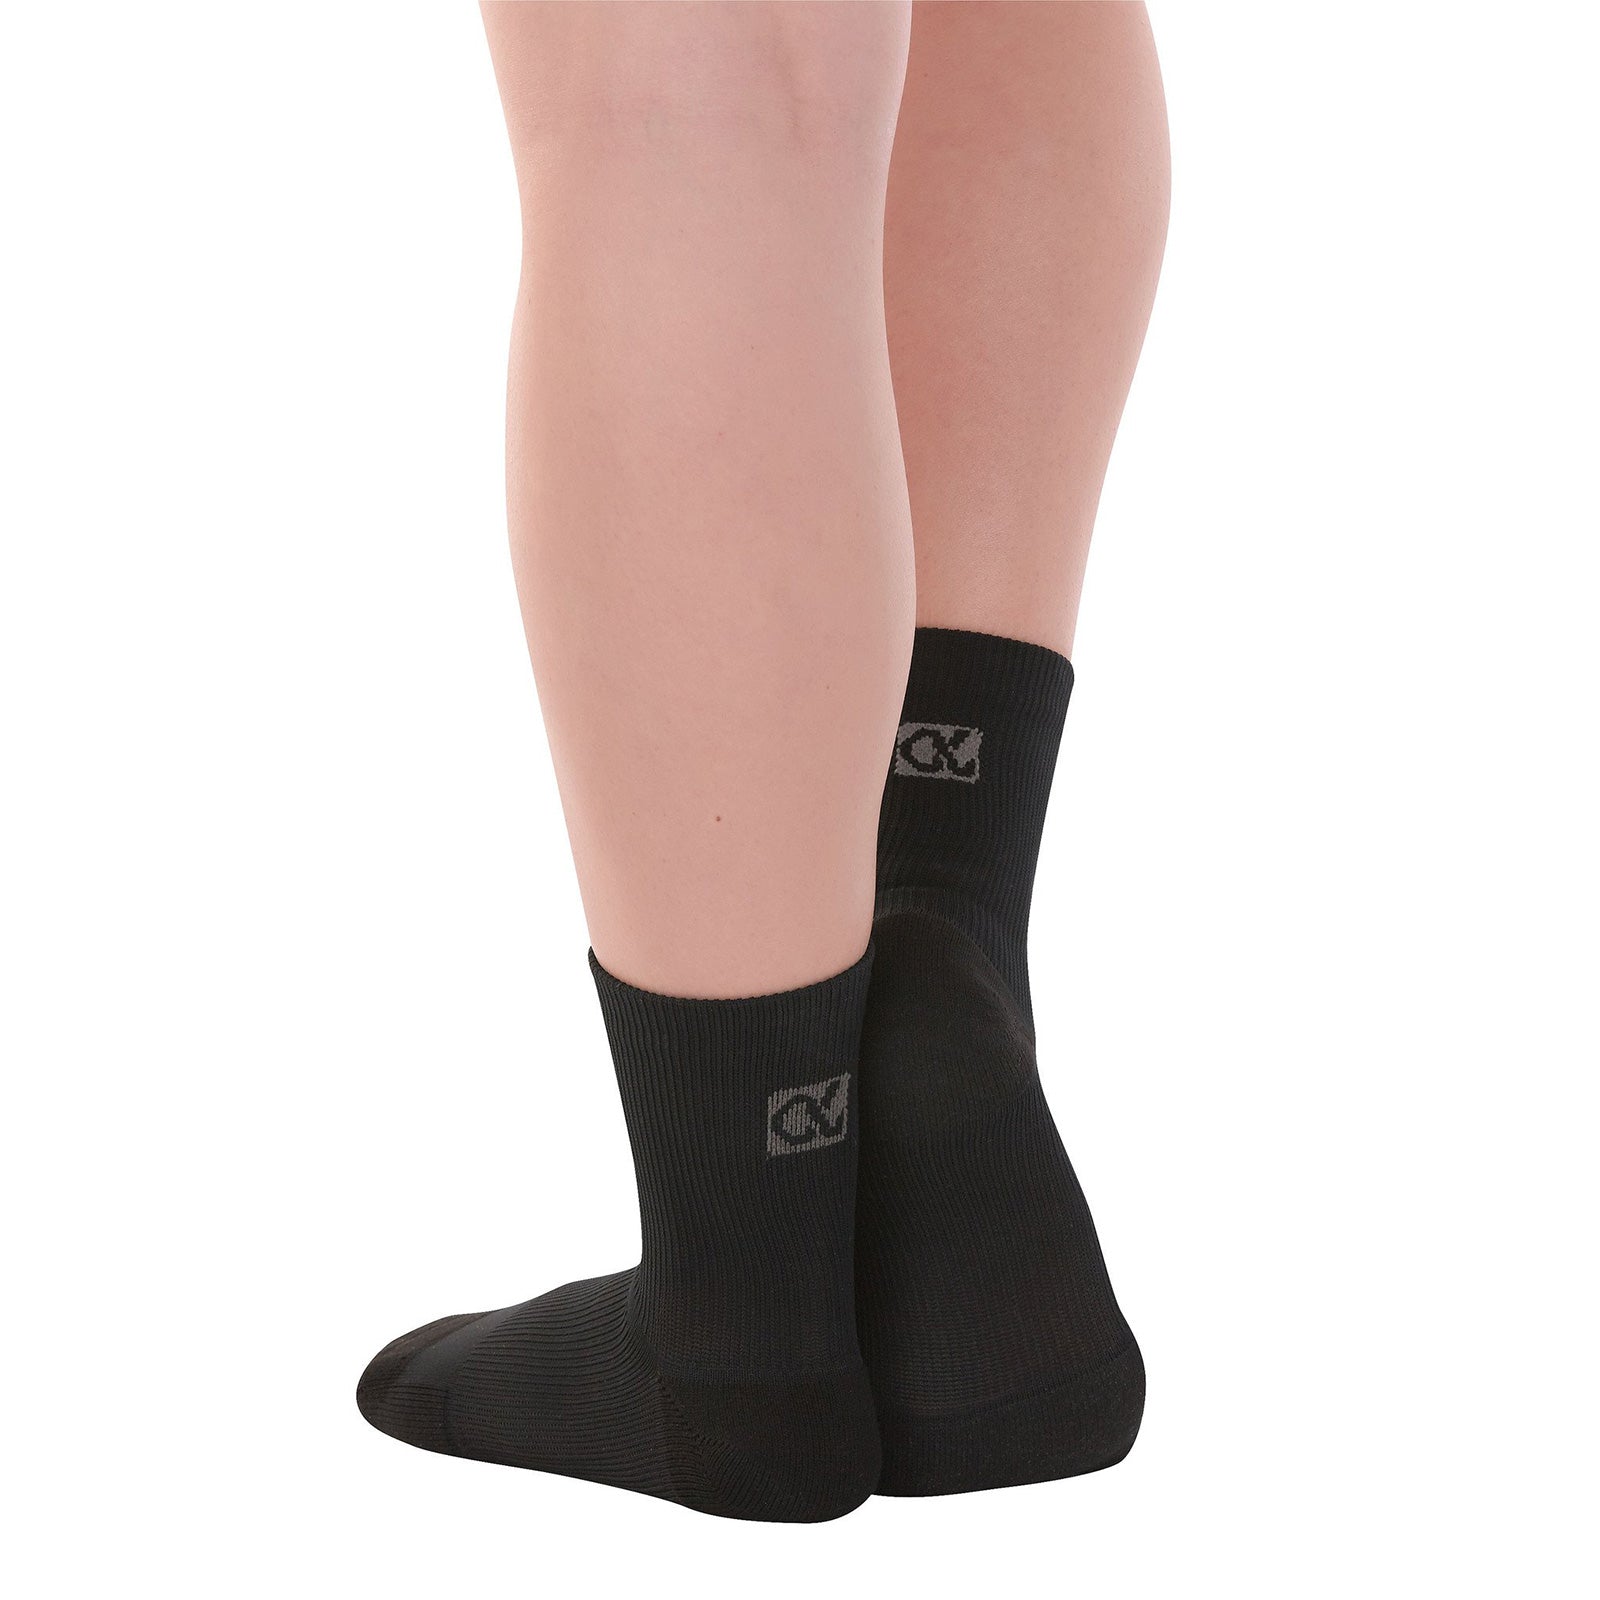 Spring is right around the corner! Try Apolla compression socks today to  see why dancers love Apolla! #CompressionSocks #Spring #BalletDa